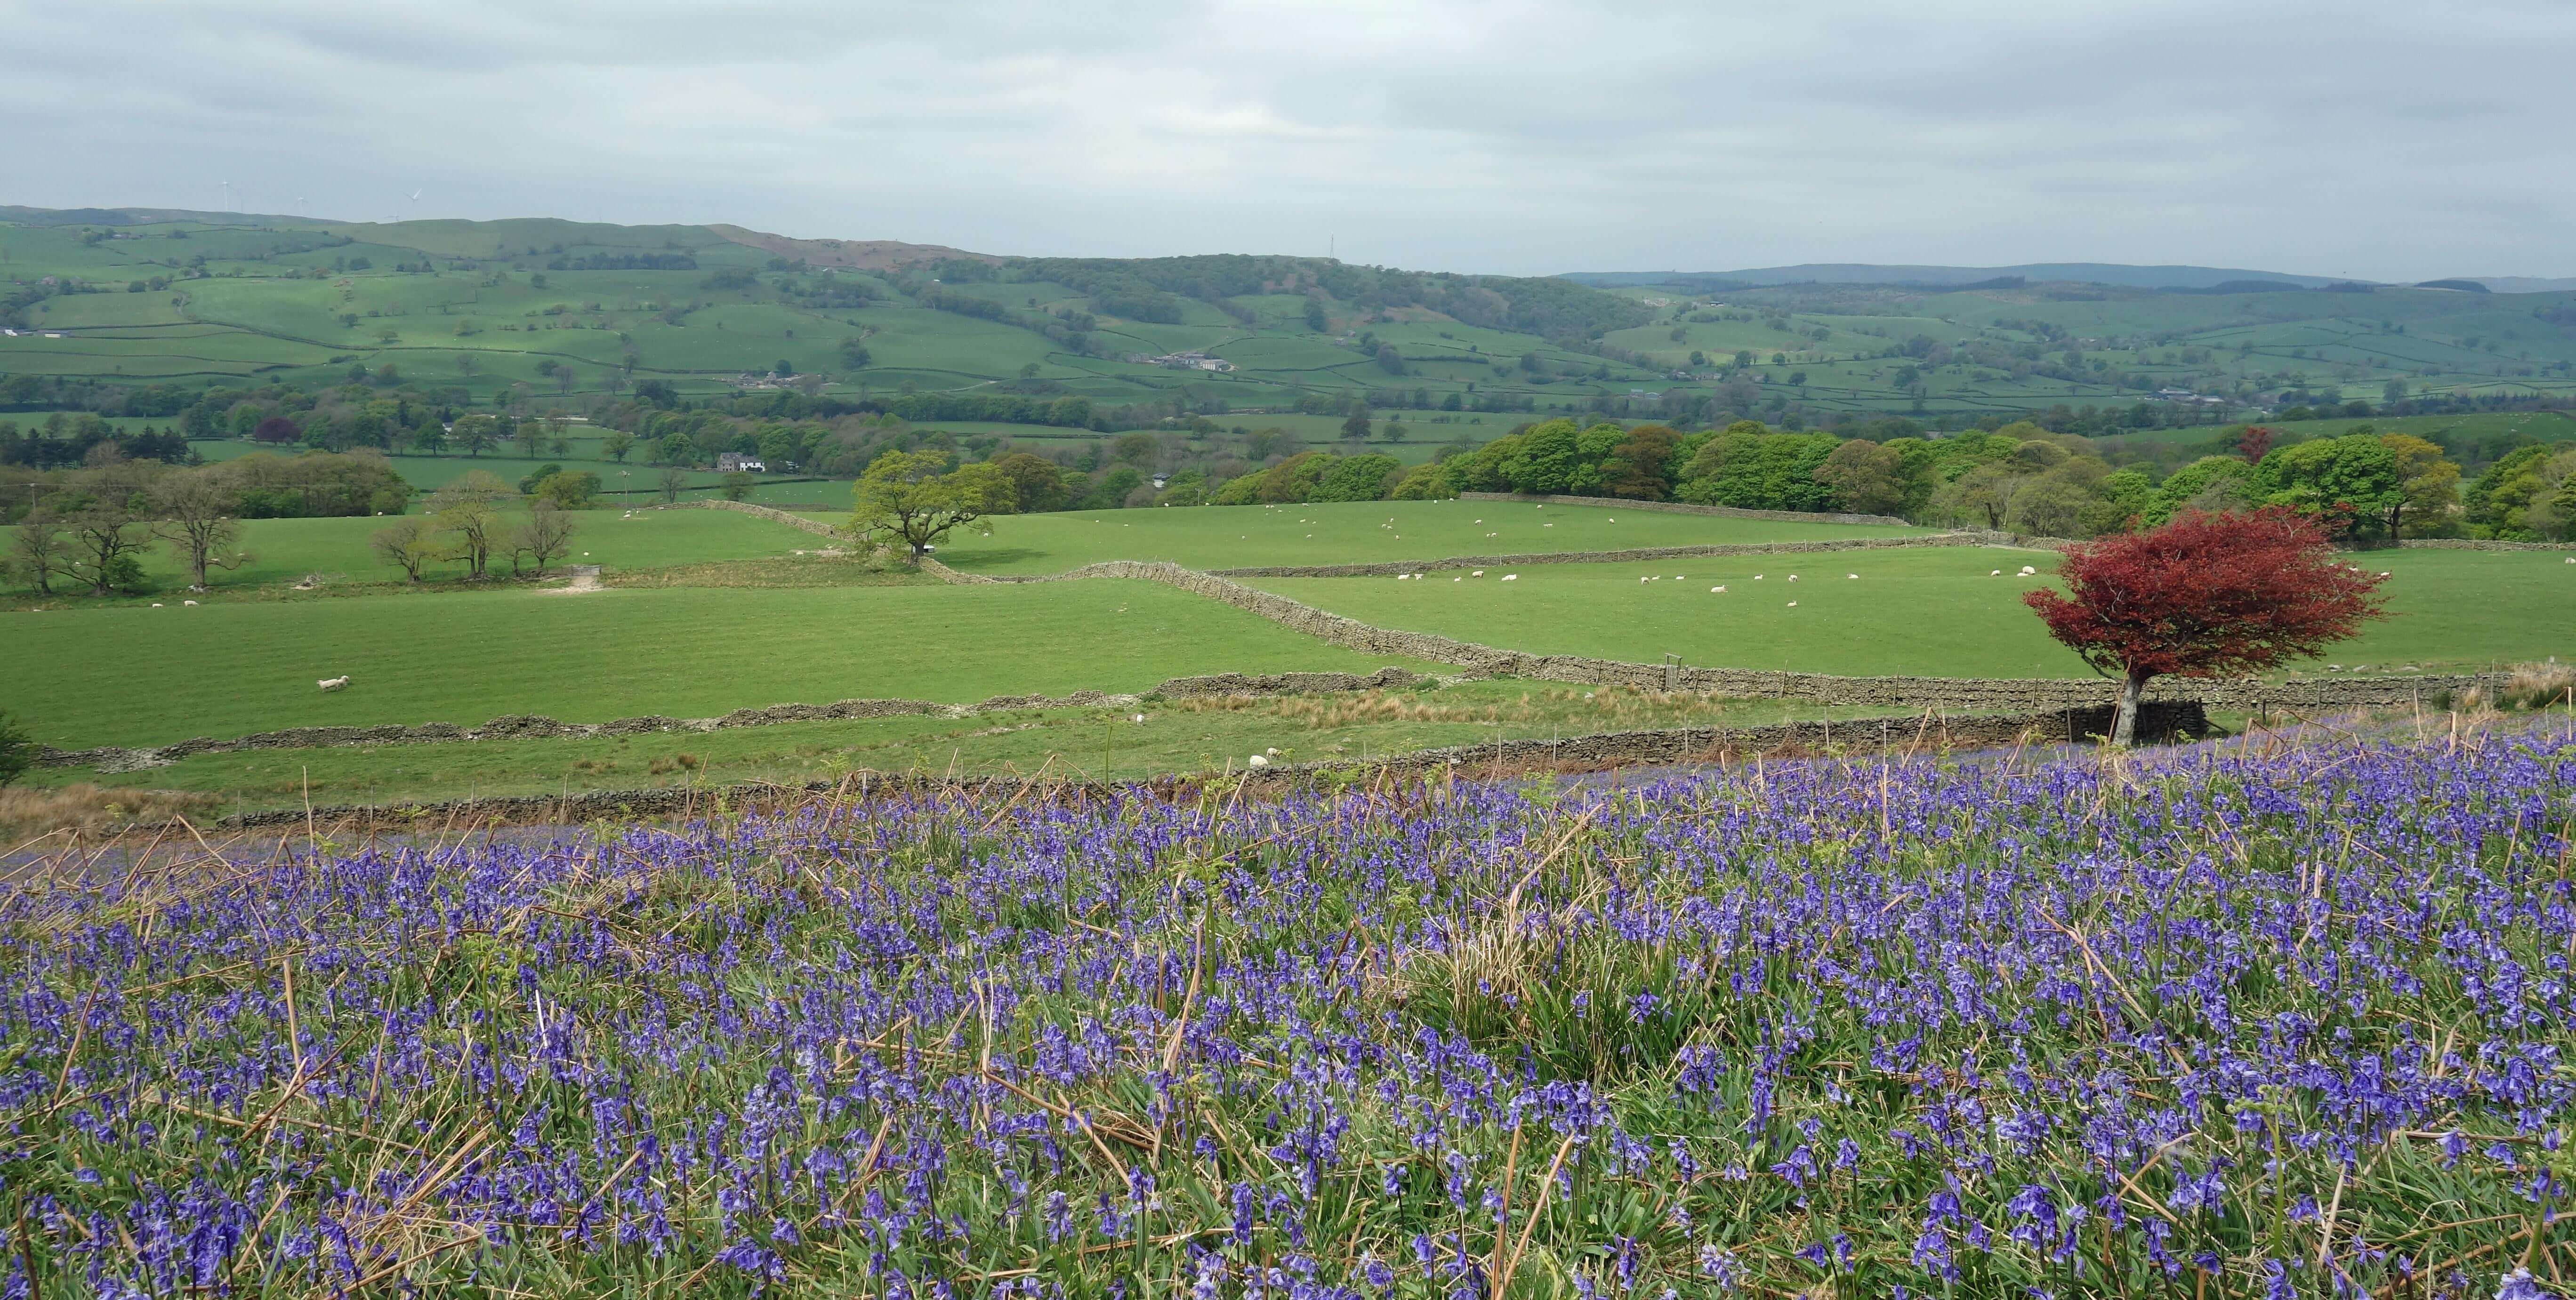 Bluebells, copper-beech and Lune valley